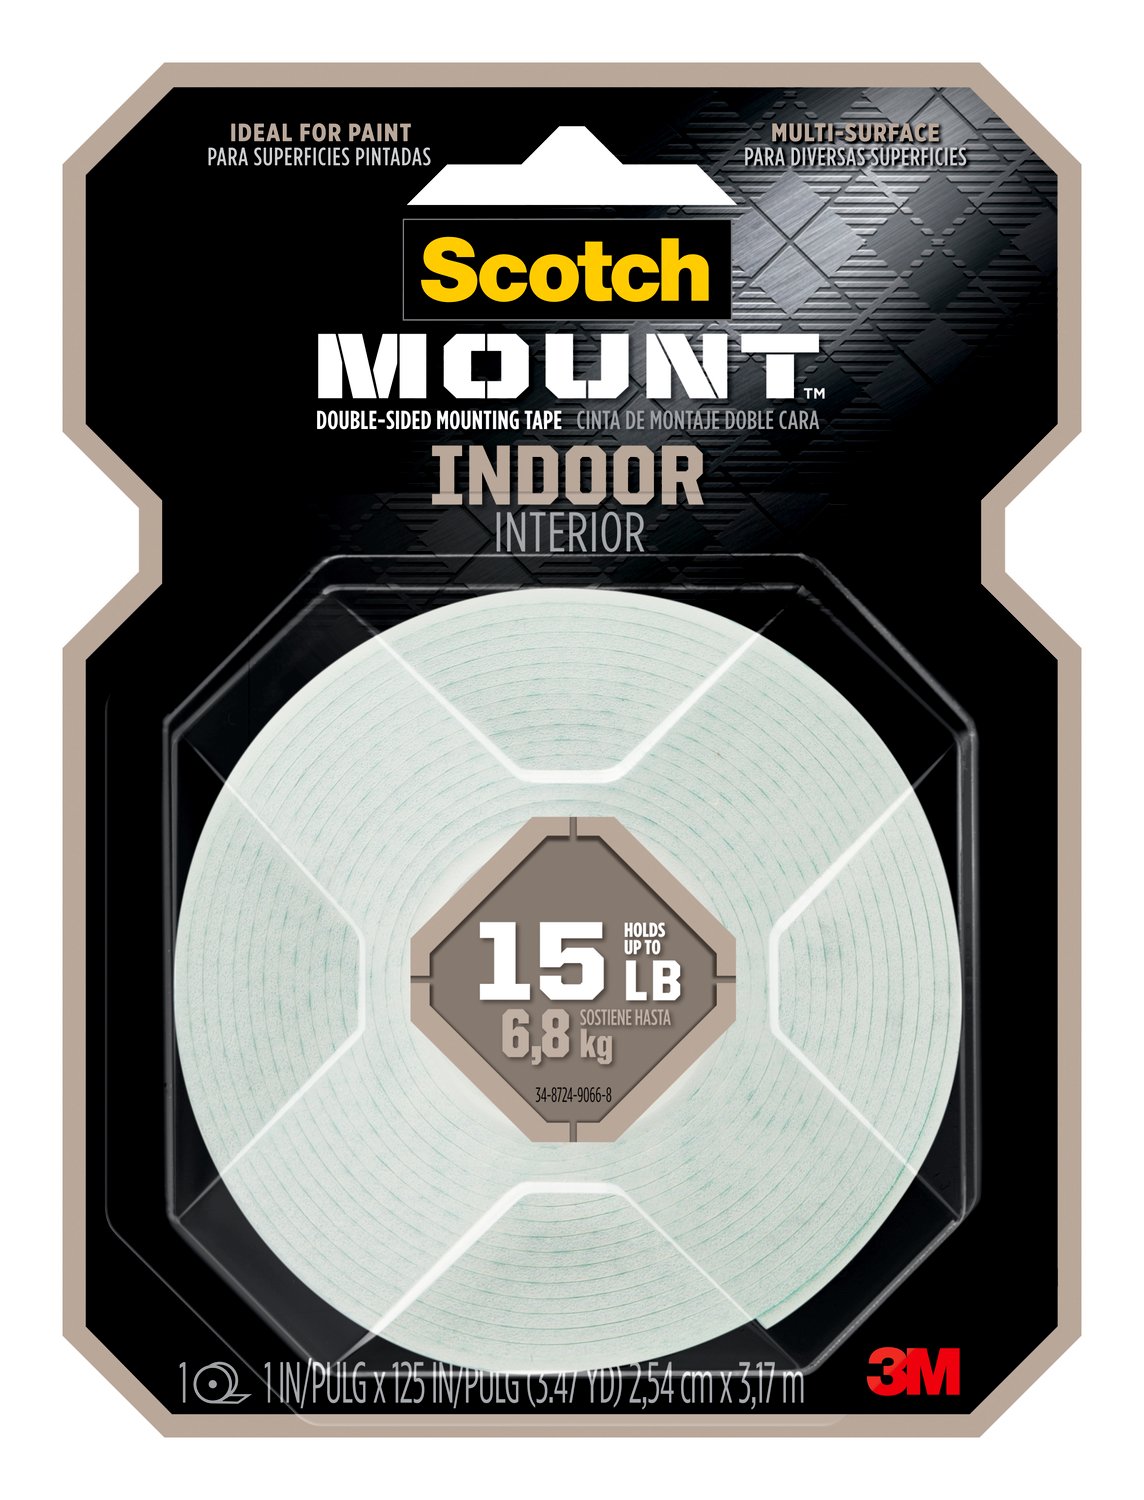 7100216169 - Scotch-Mount Indoor Double-Sided Mounting Tape 314H-MED, 1 in x 125 in (2,54 cm x 3,17 m)